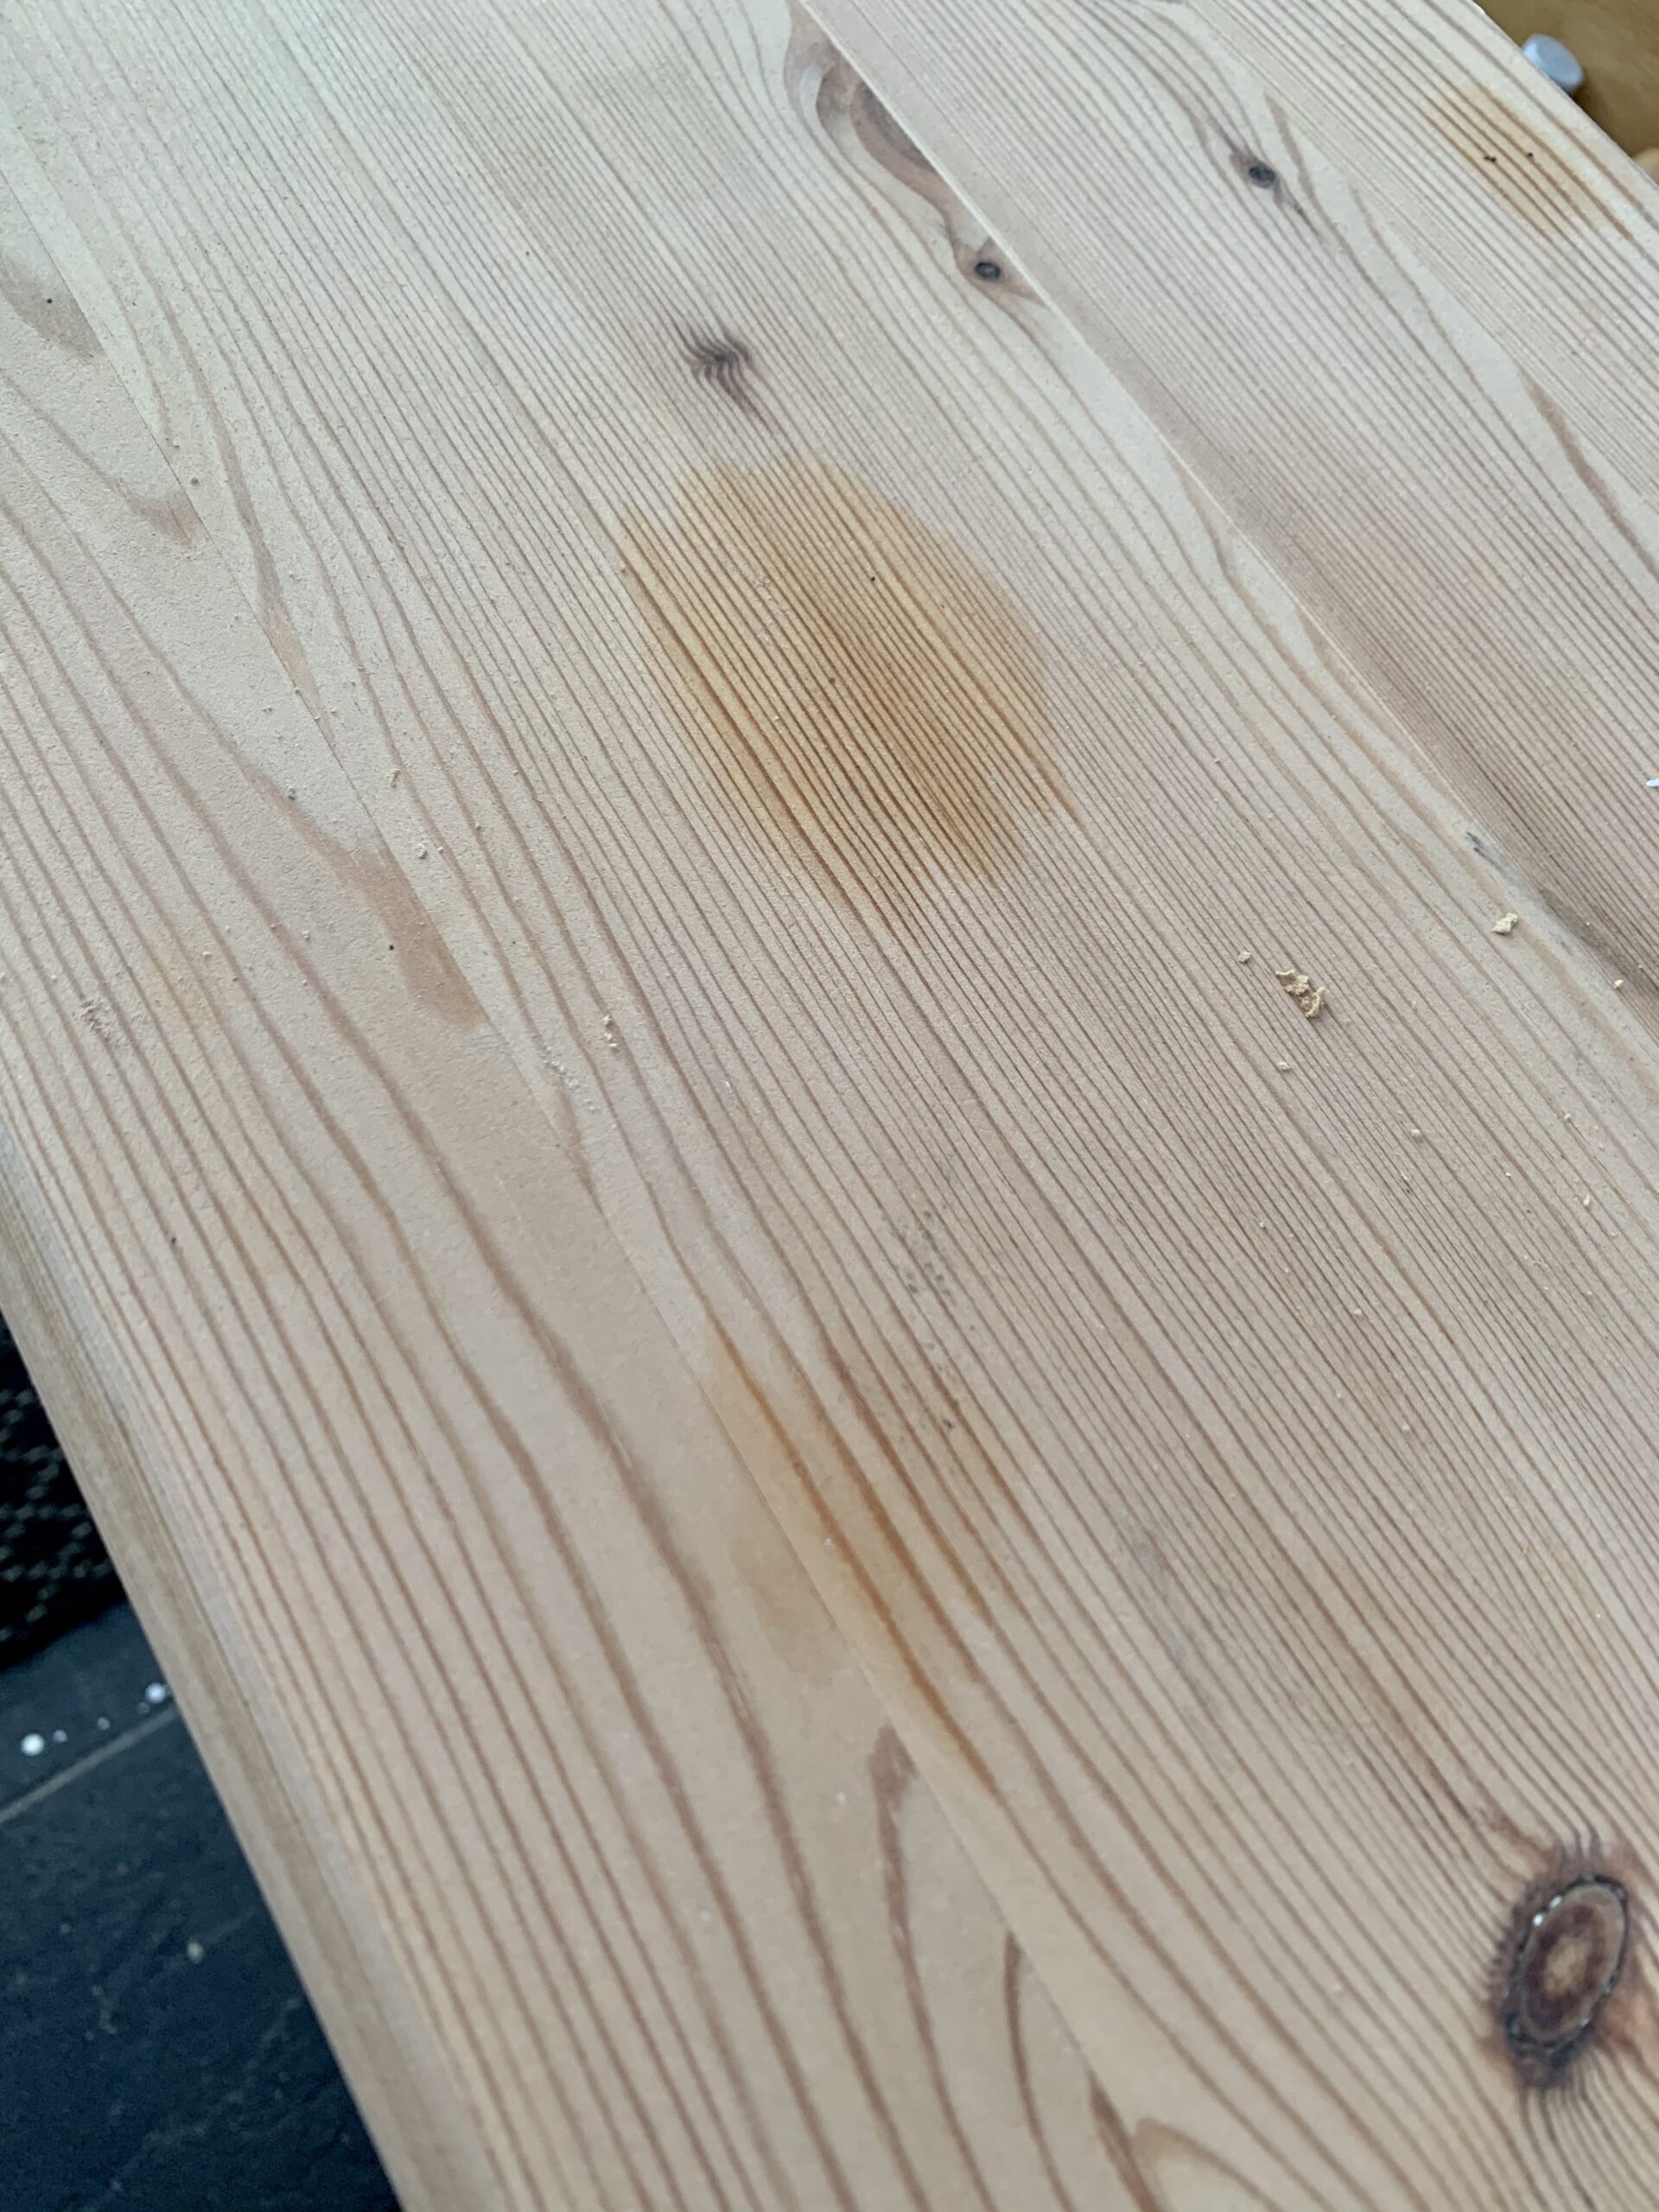 Oil stains on the raw wood